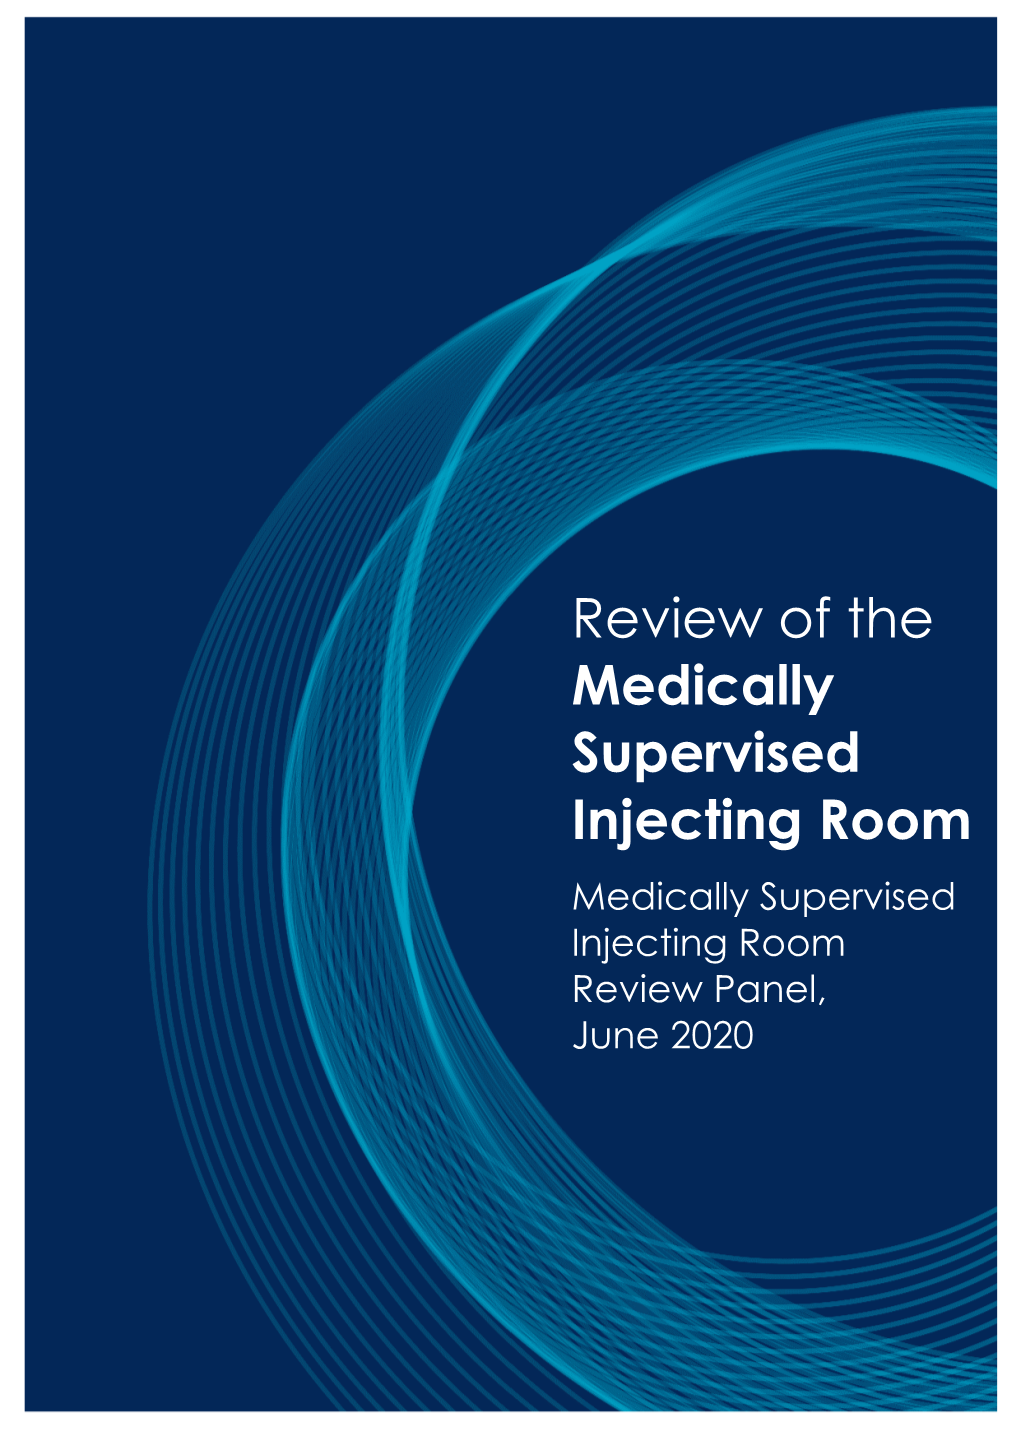 Review of the Medically Supervised Injecting Room Medically Supervised Injecting Room Review Panel, June 2020